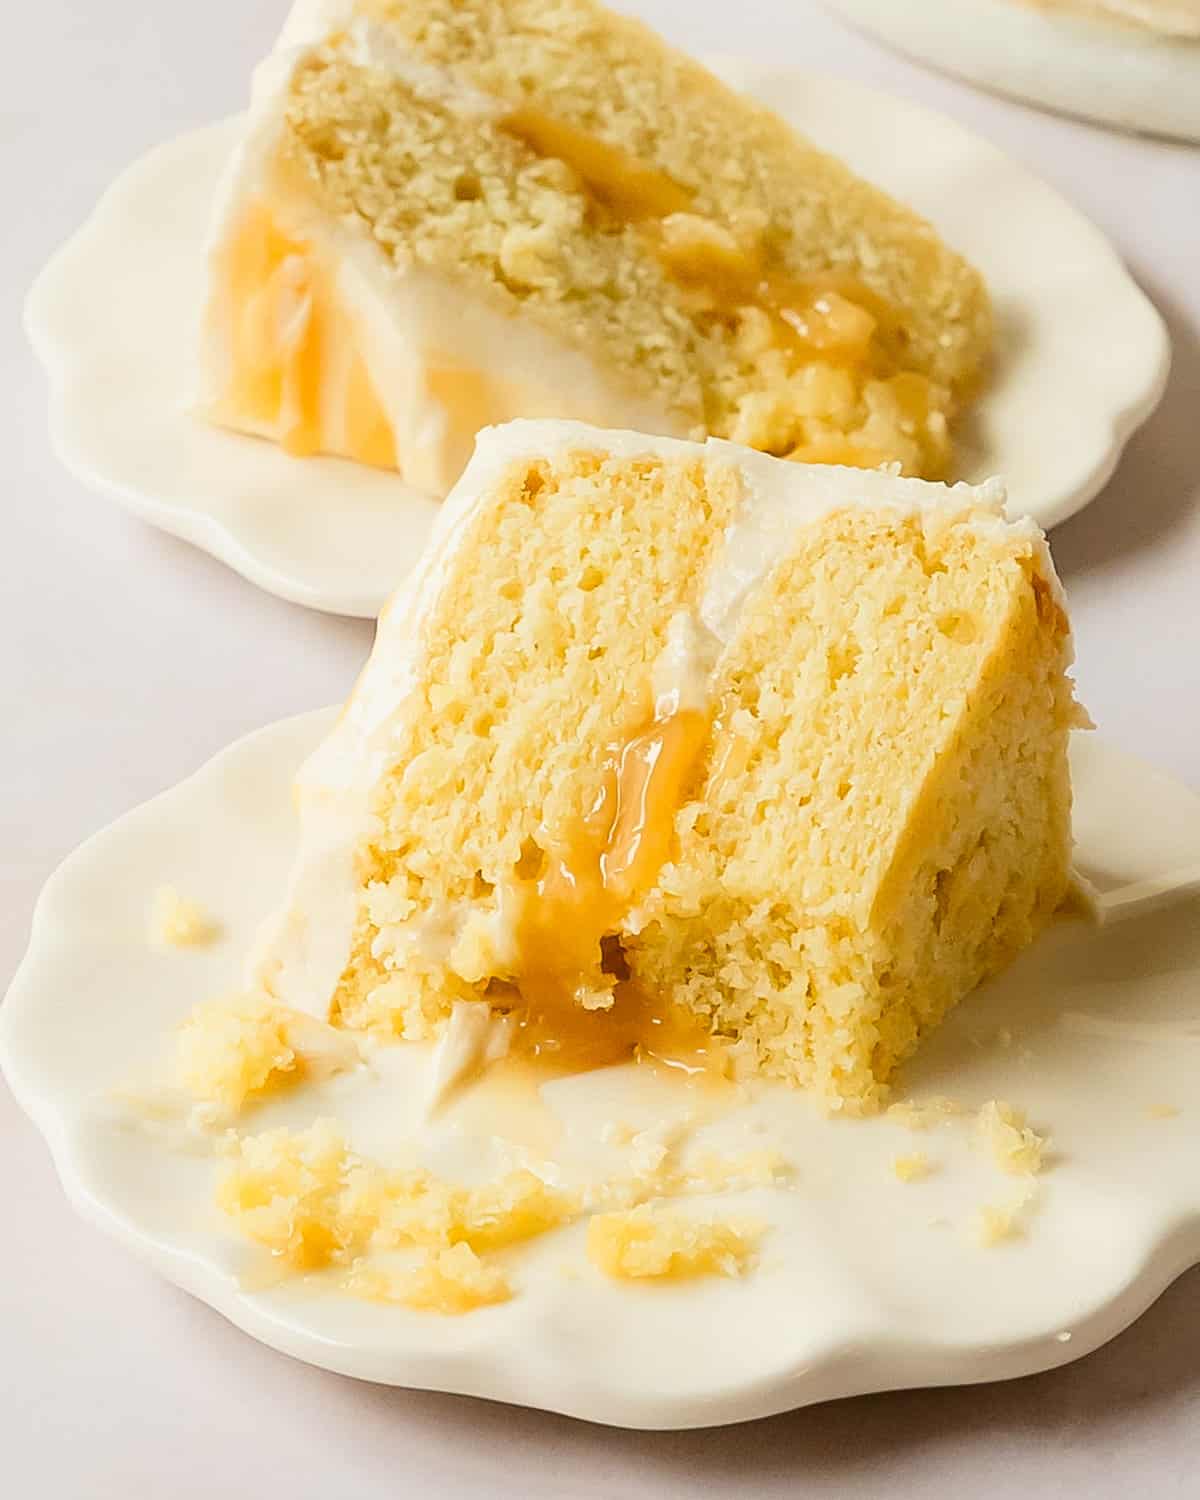 Lemon curd cake is a fresh and flavorful moist lemon cake with layers of creamy tart lemon curd, frosted with a sweet, creamy and tangy lemon cream cheese frosting.  With it’s beautiful bakery worthy appearance and easy preparation, this lemon cake with lemon curd is the perfect cake for all your spring and summer gatherings. 